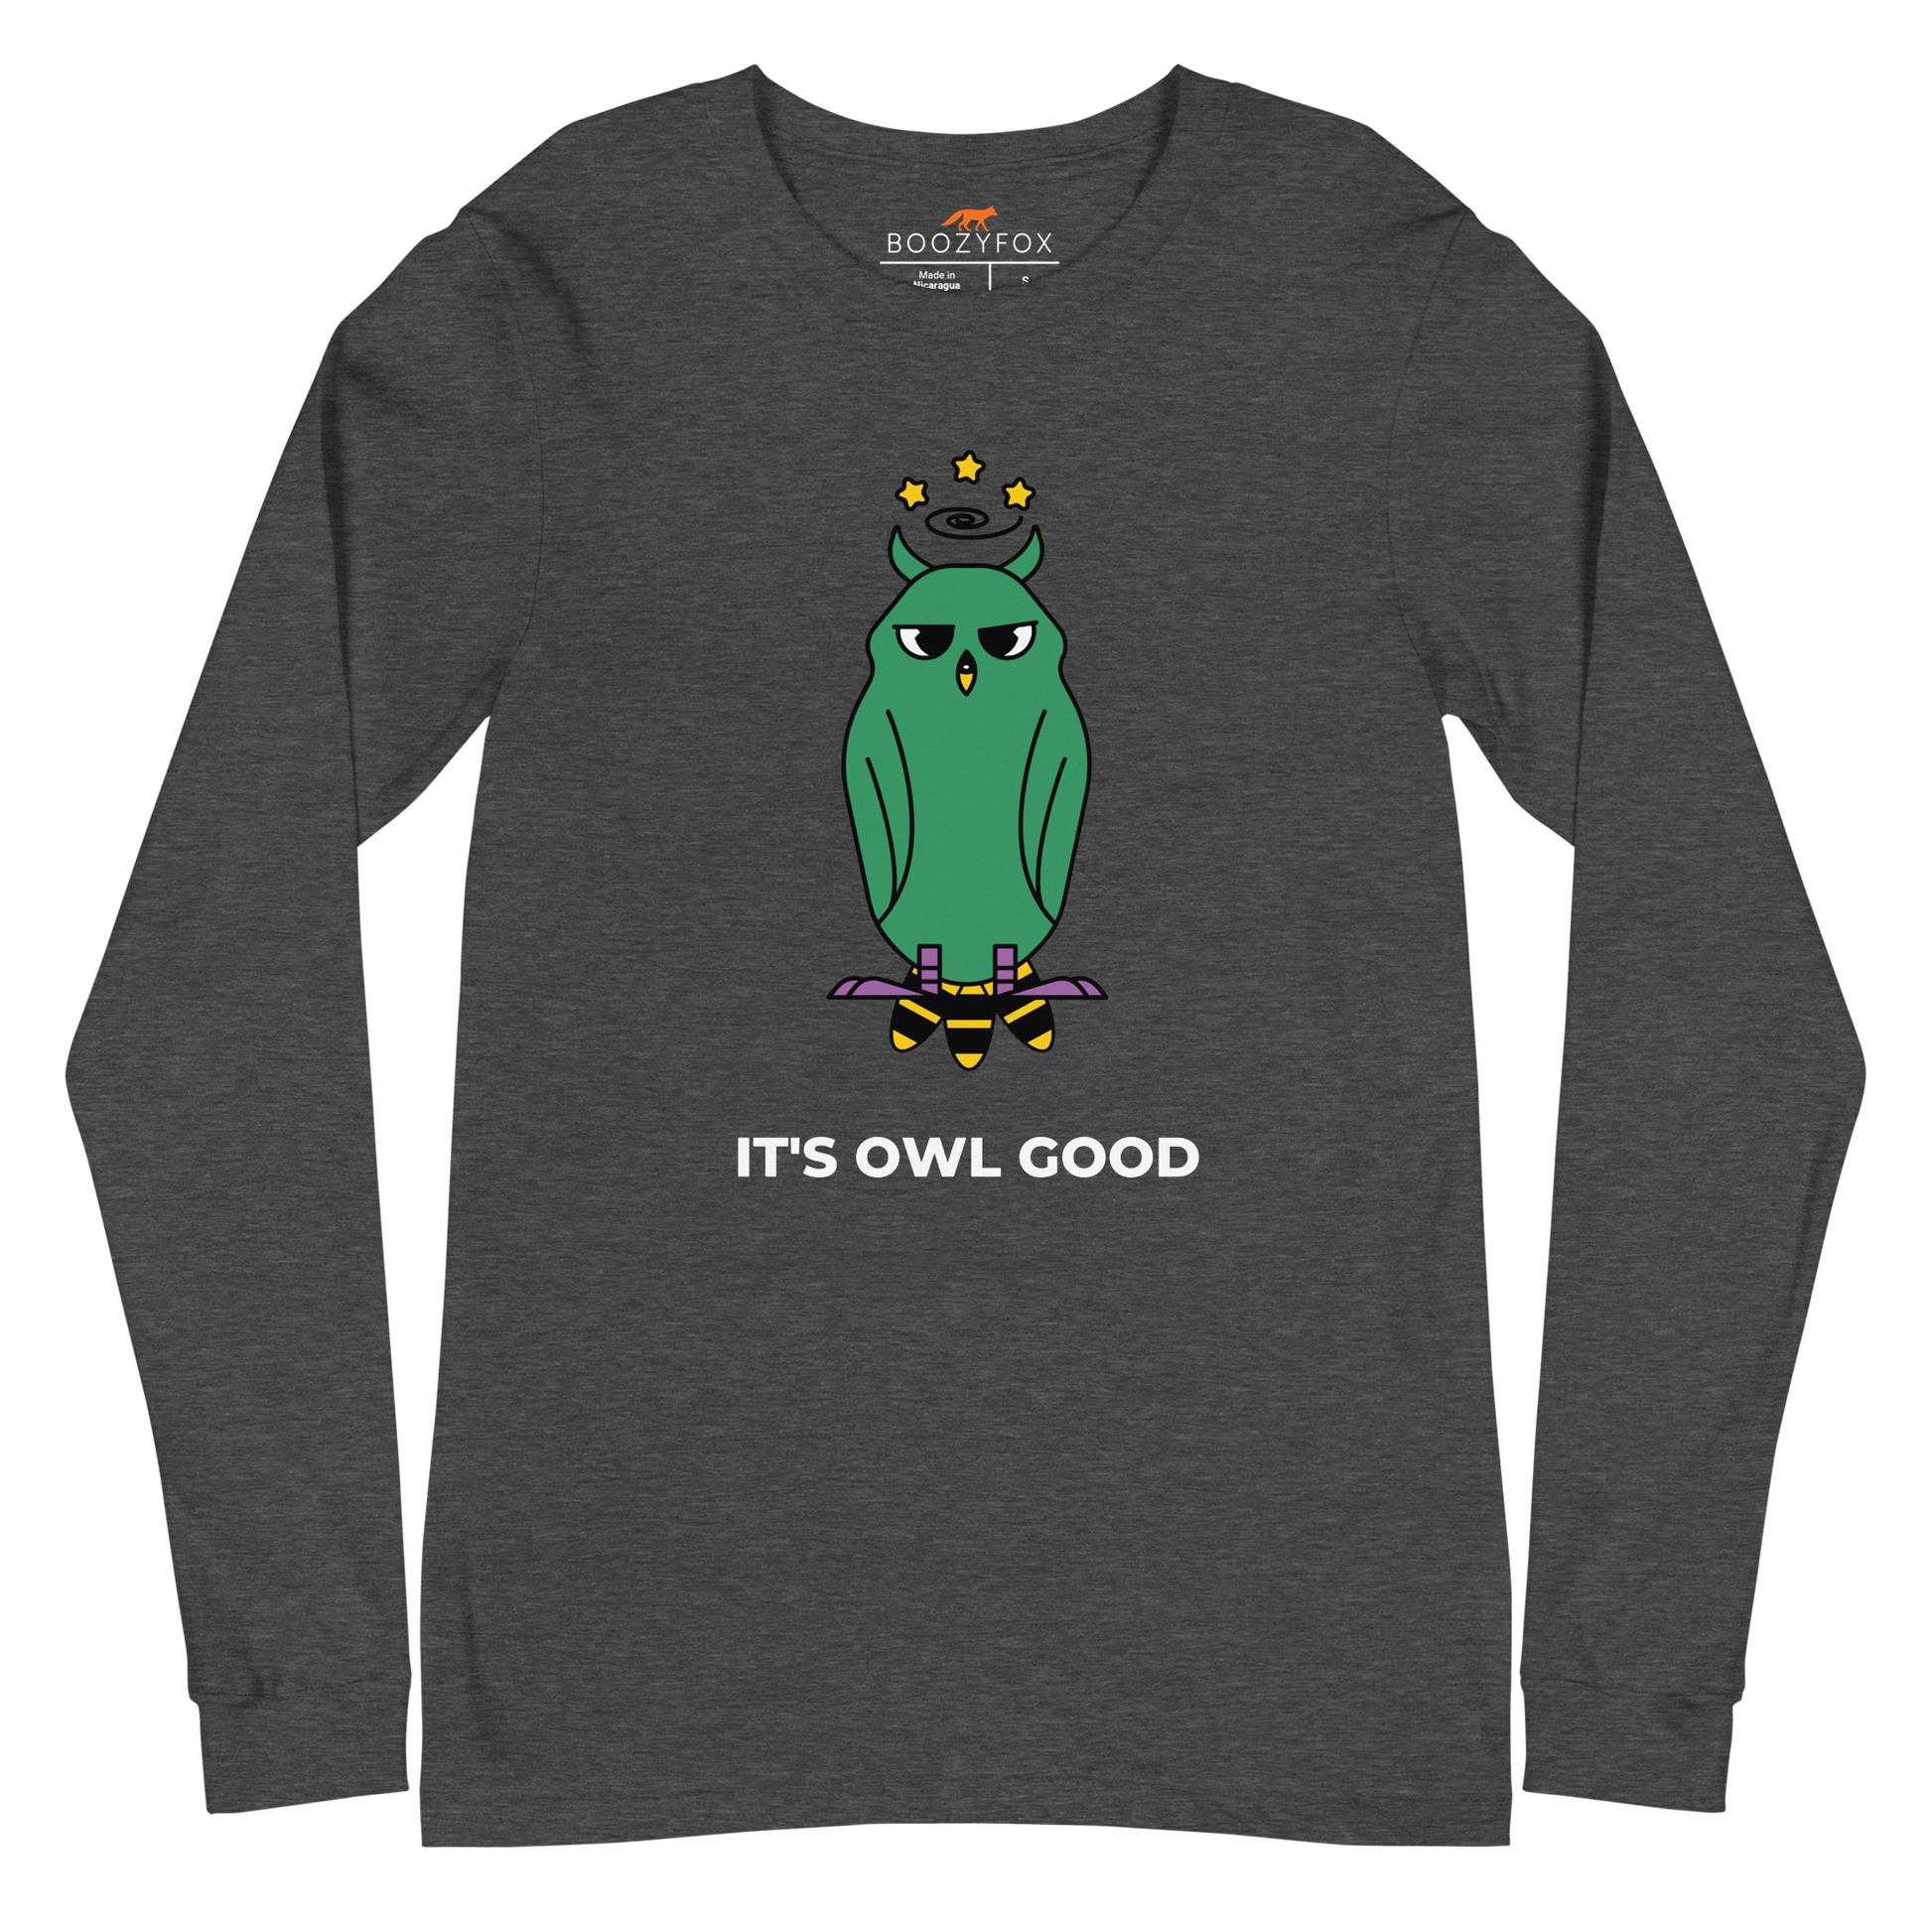 Dark Grey Heather Owl Long Sleeve Tee featuring a captivating It's Owl Good graphic on the chest - Funny Owl Long Sleeve Graphic Tees - Boozy Fox